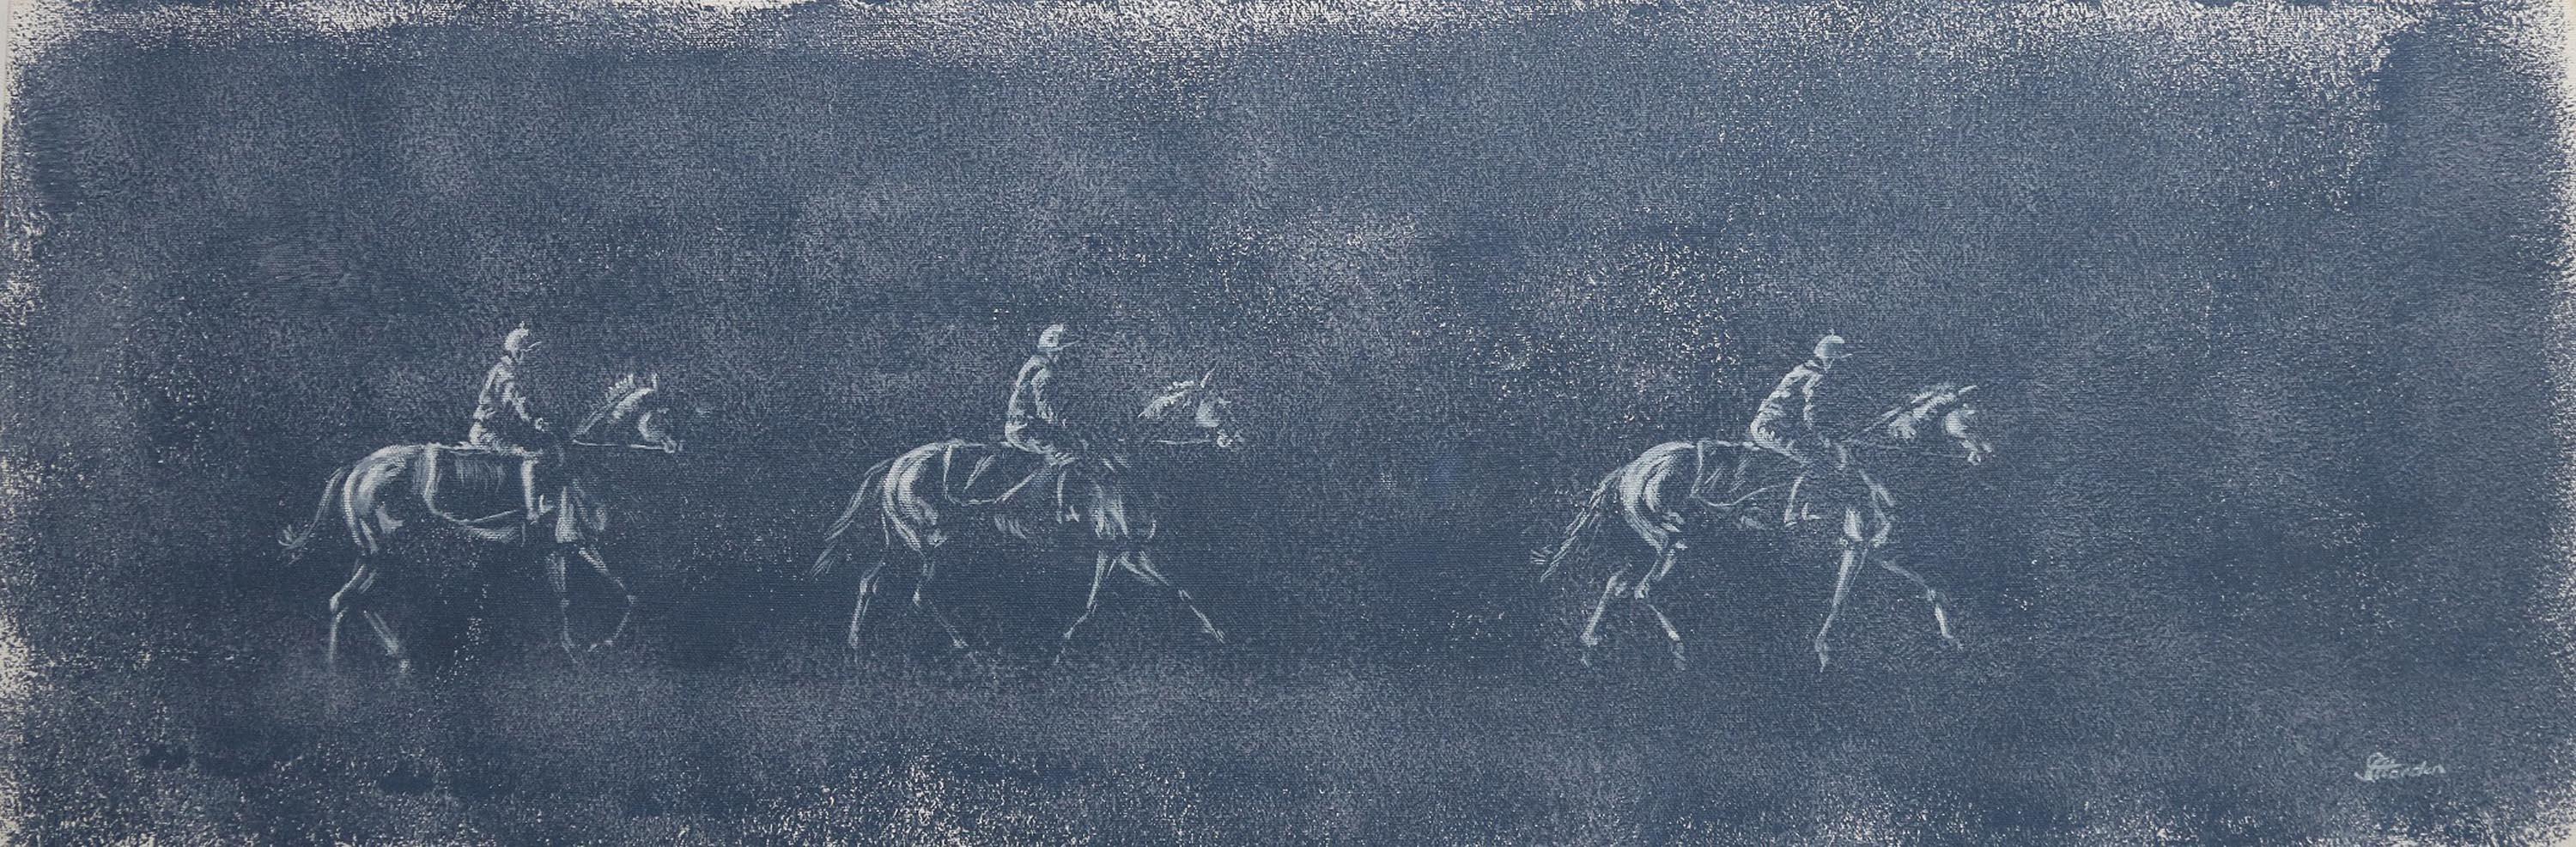 Sophie Harden Animal Painting - The Morning Parade, Original Blue Painting of Horse Riders